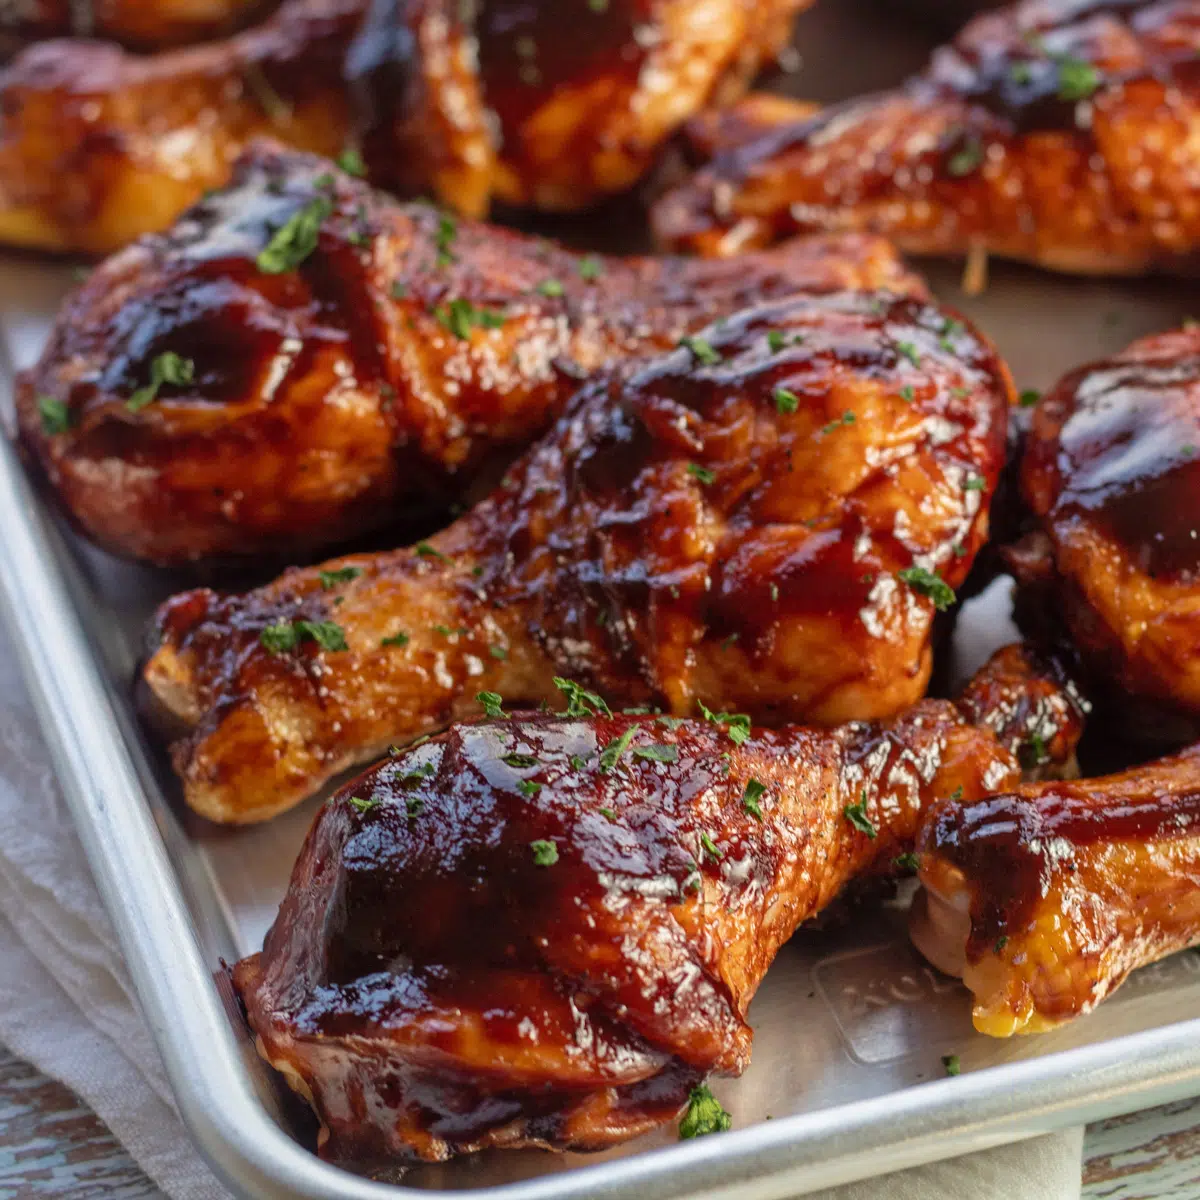 Baked bbq chicken drumsticks  garnished with some parsley and ready to serve.